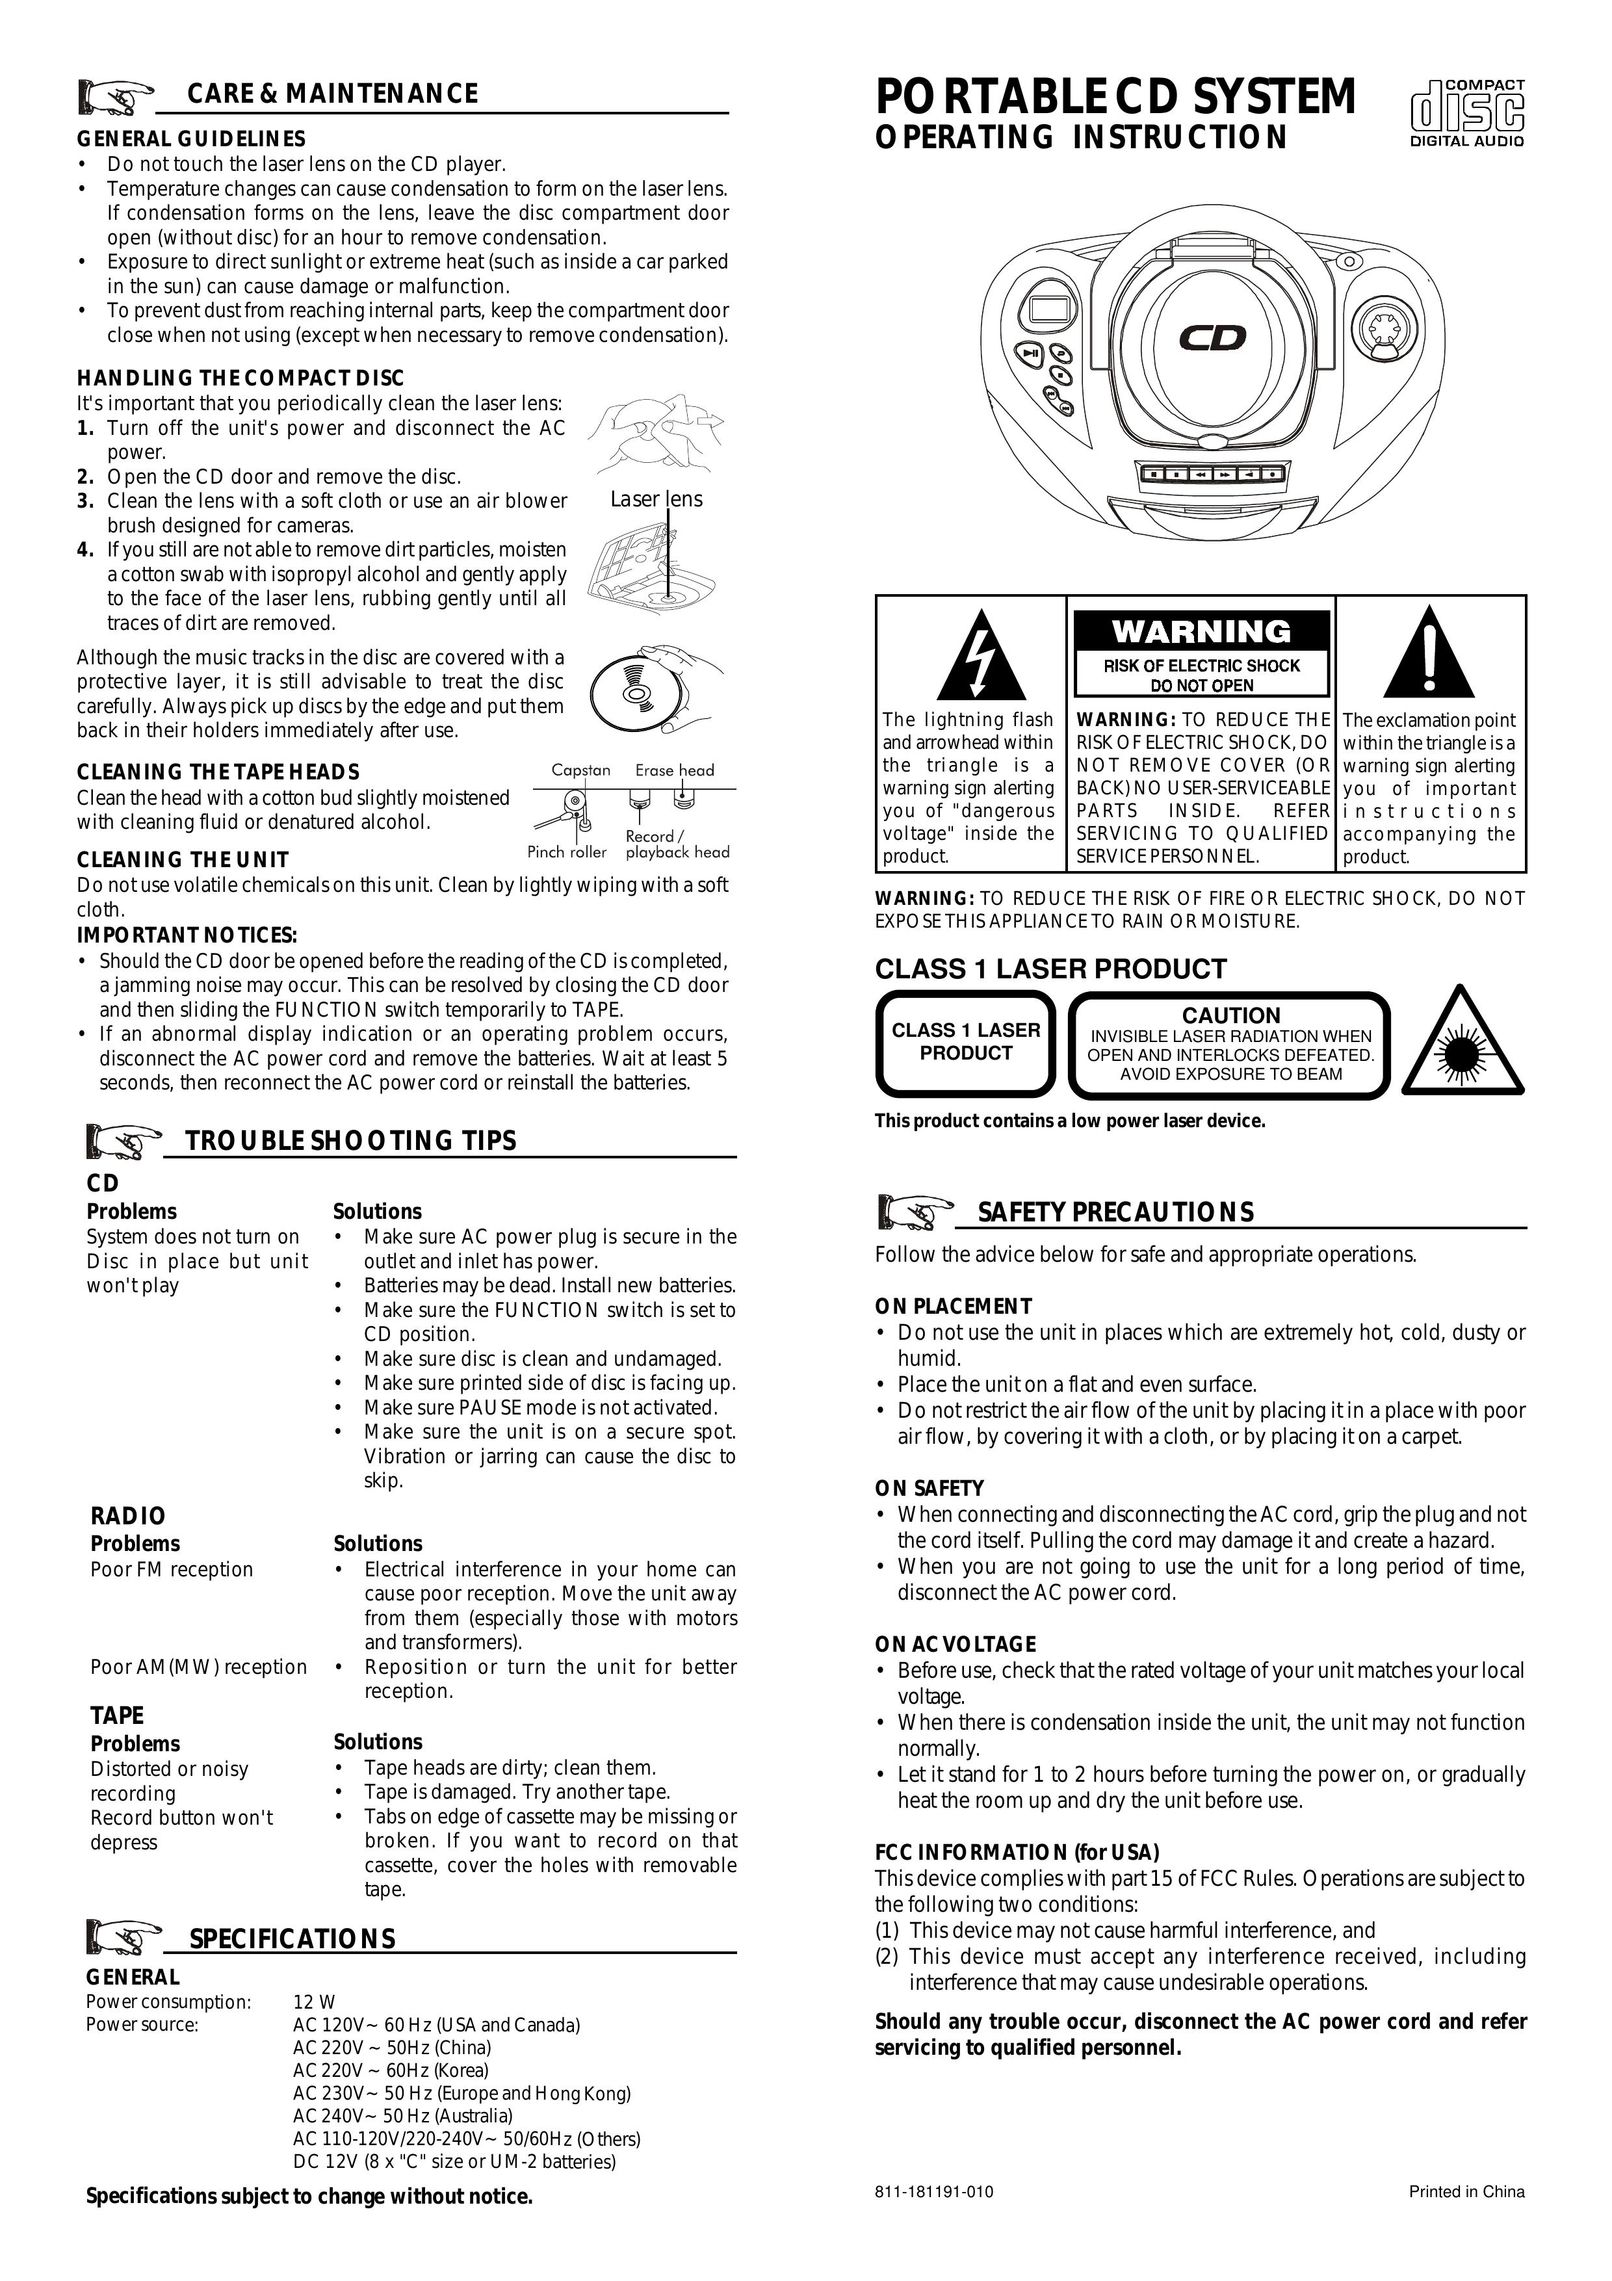 Audiovox Portable CD System CD Player User Manual